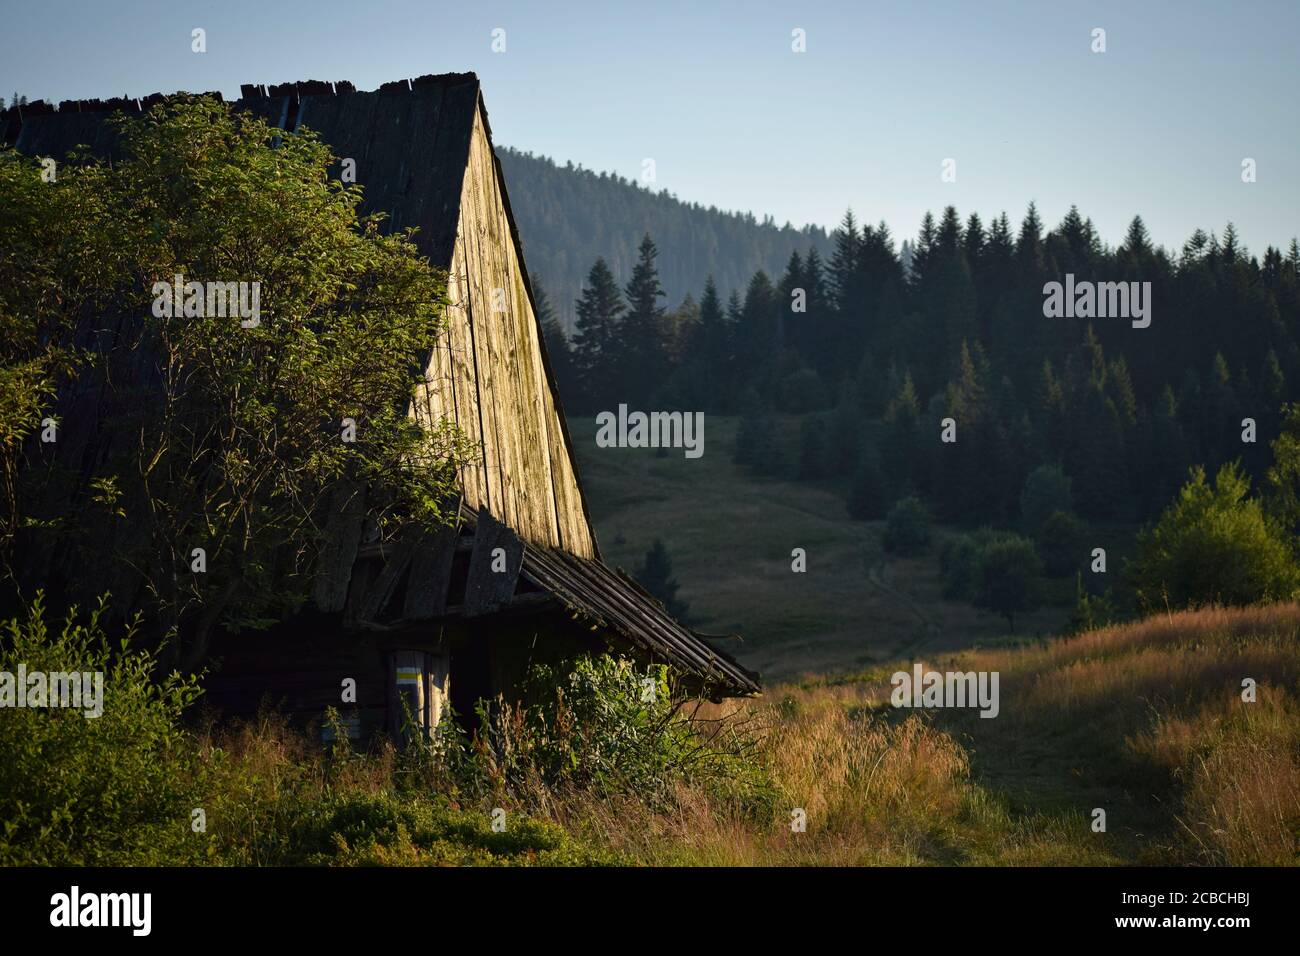 Old hut in national park Stock Photo